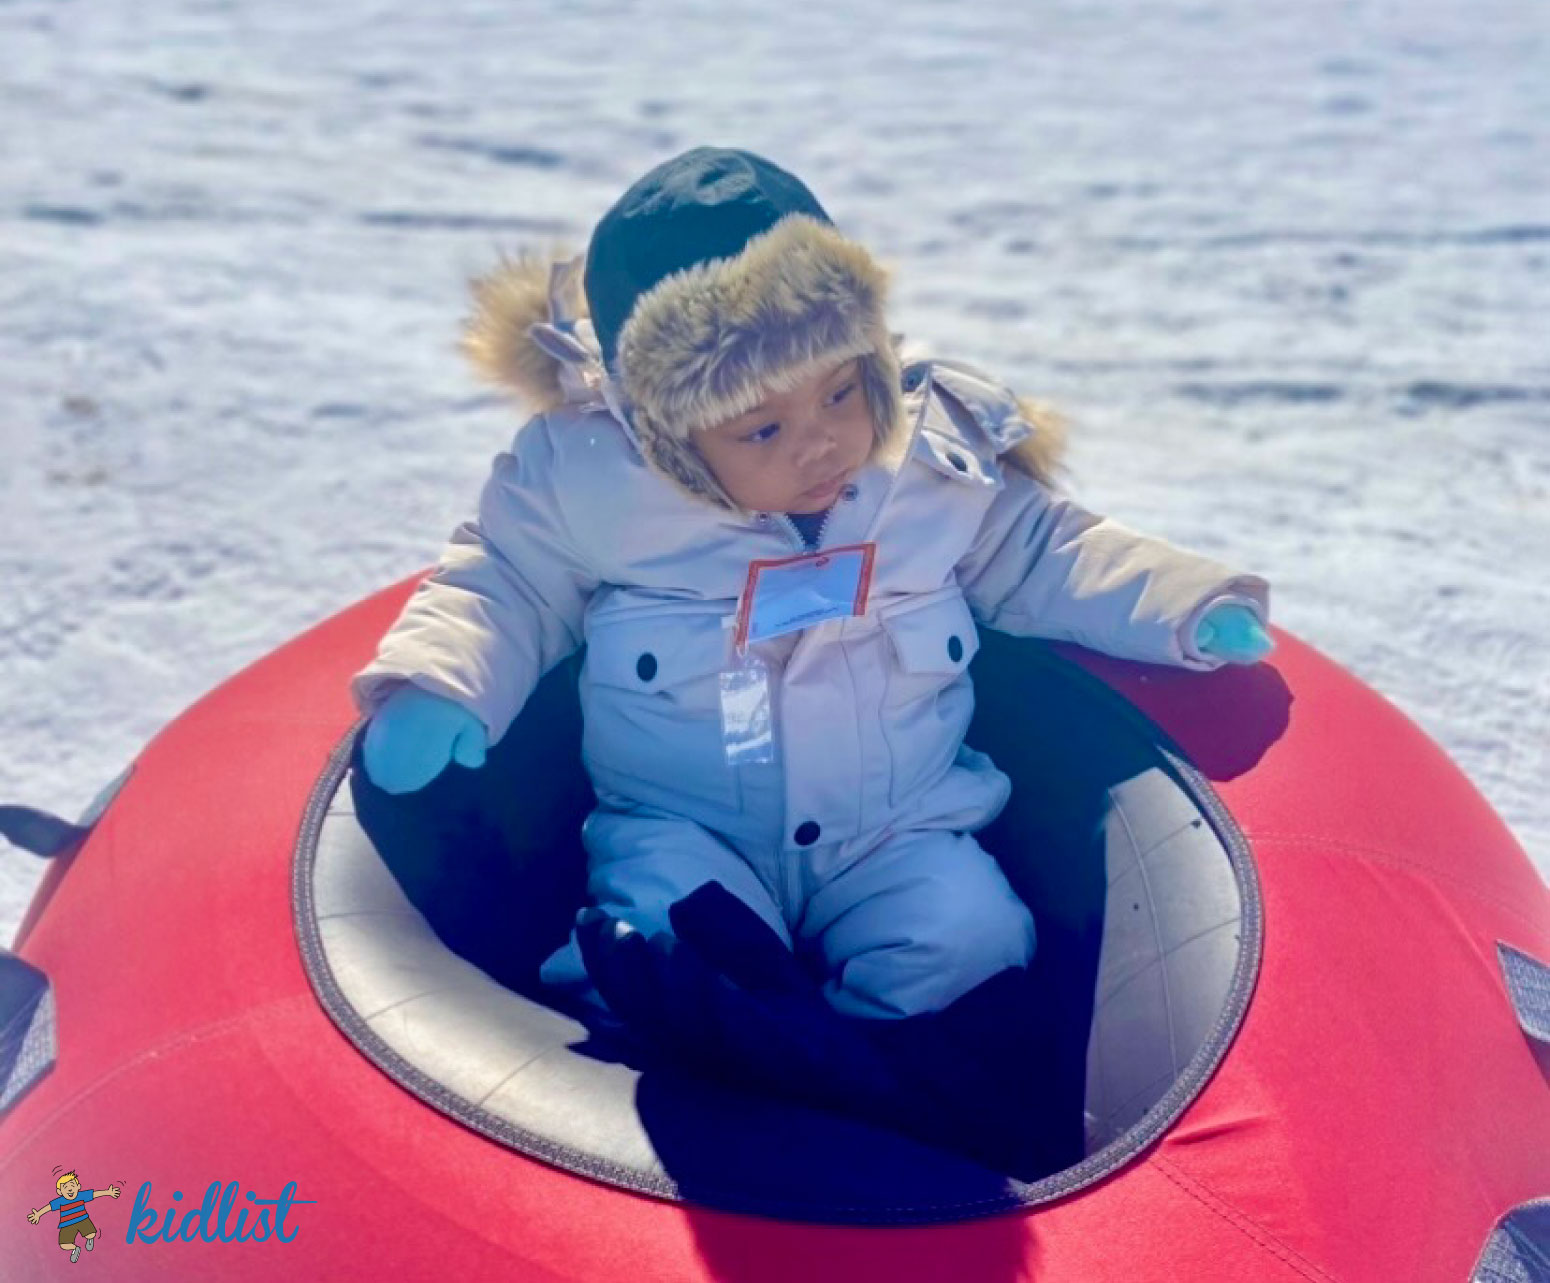 baby in a tube showing snow tubing as one of the most fun winter activities